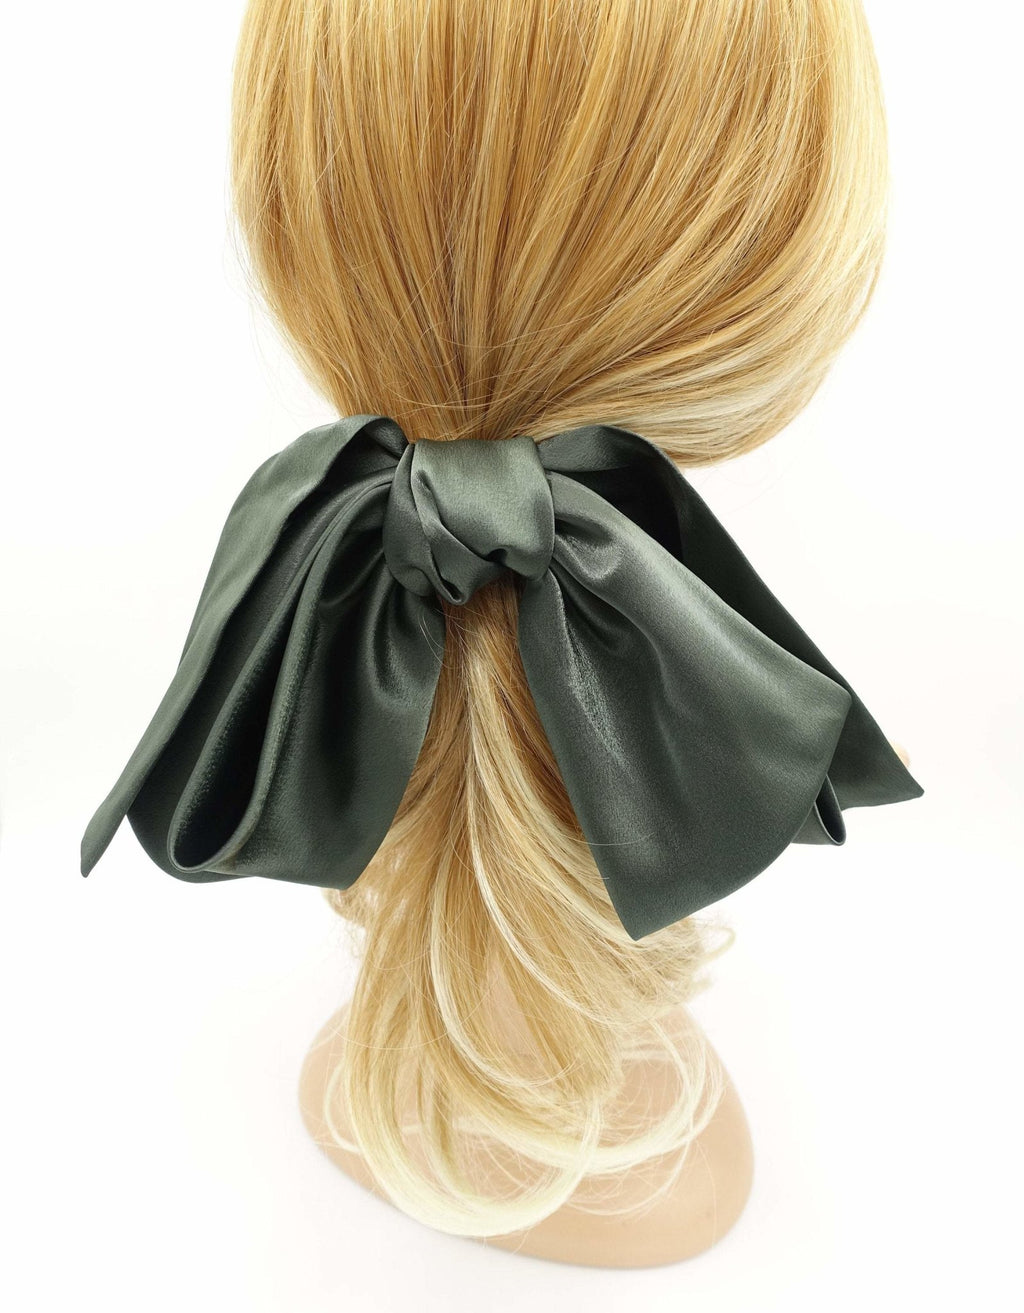 VeryShine glossy satin large hair bow double layered droopy bow hair stylish Autumn hair accessory for women